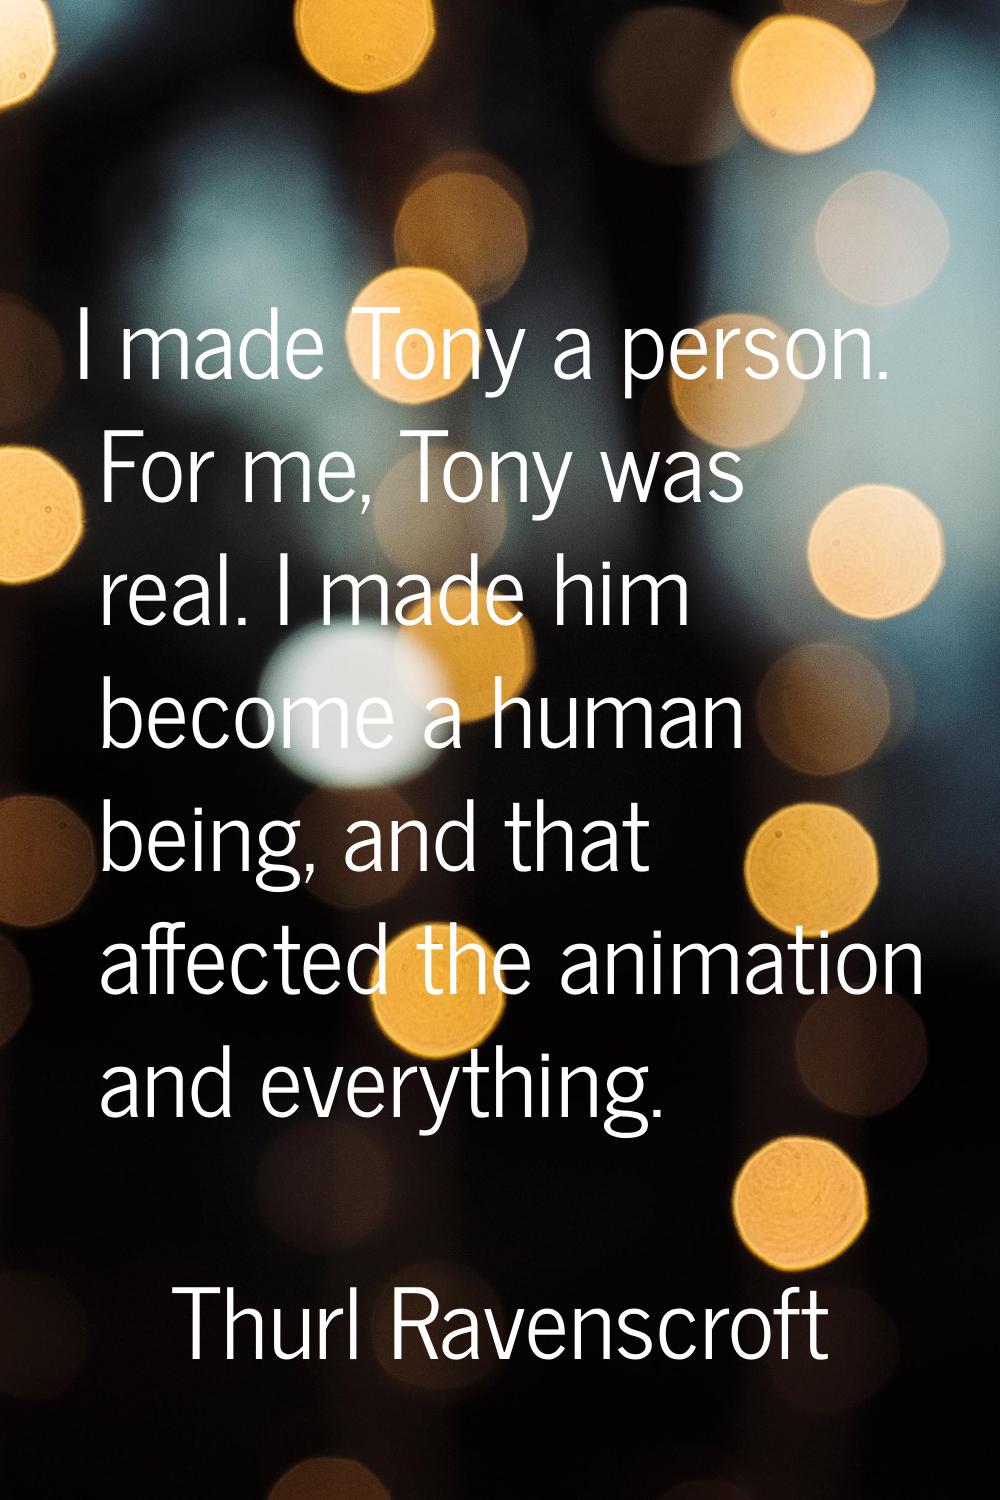 I made Tony a person. For me, Tony was real. I made him become a human being, and that affected the